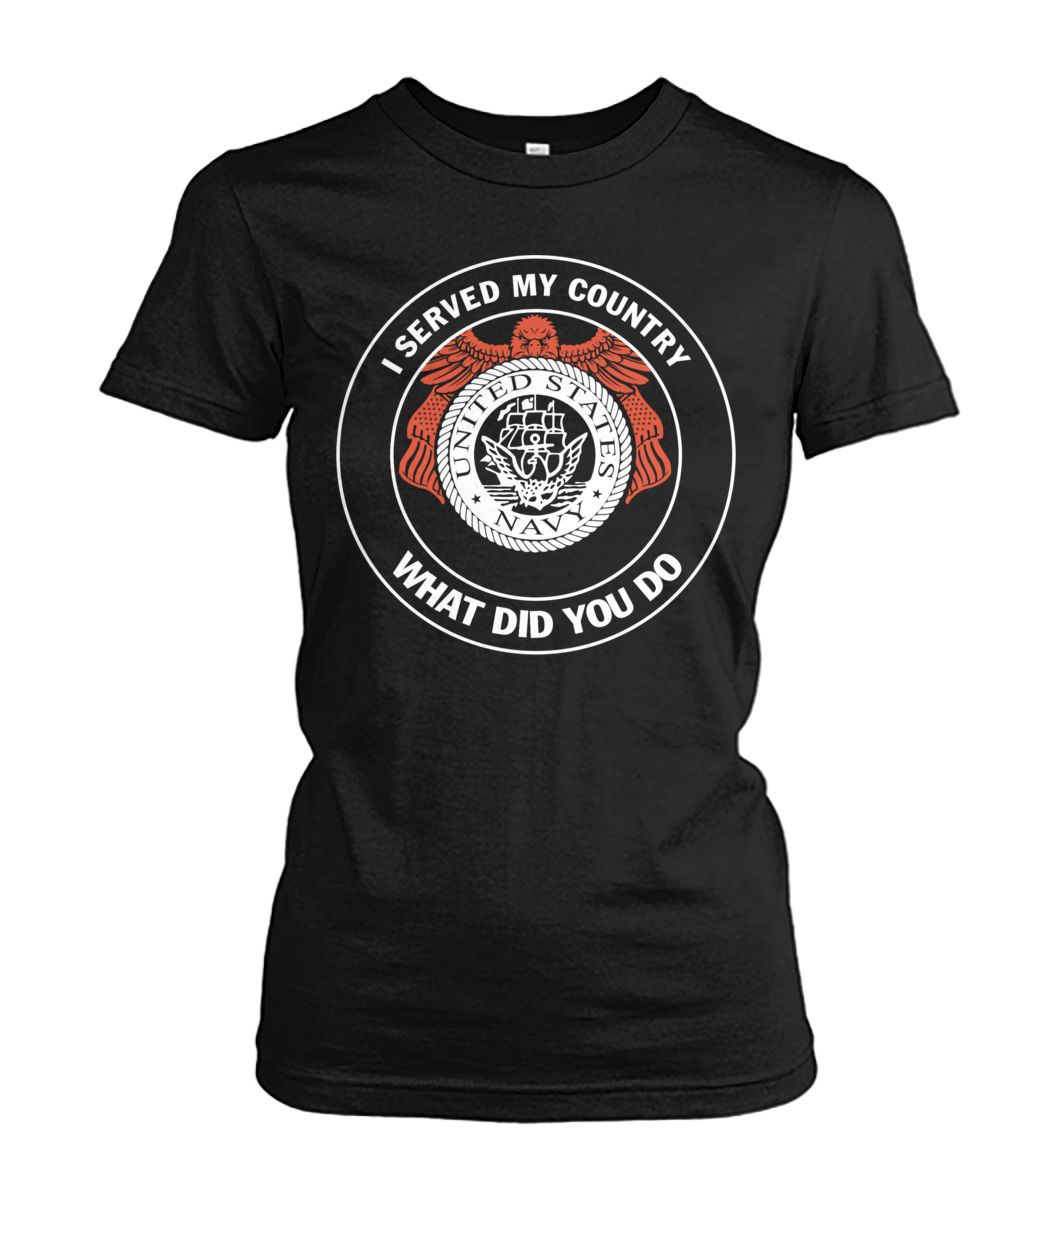 I served my country united states navy what did you do women's crew tee